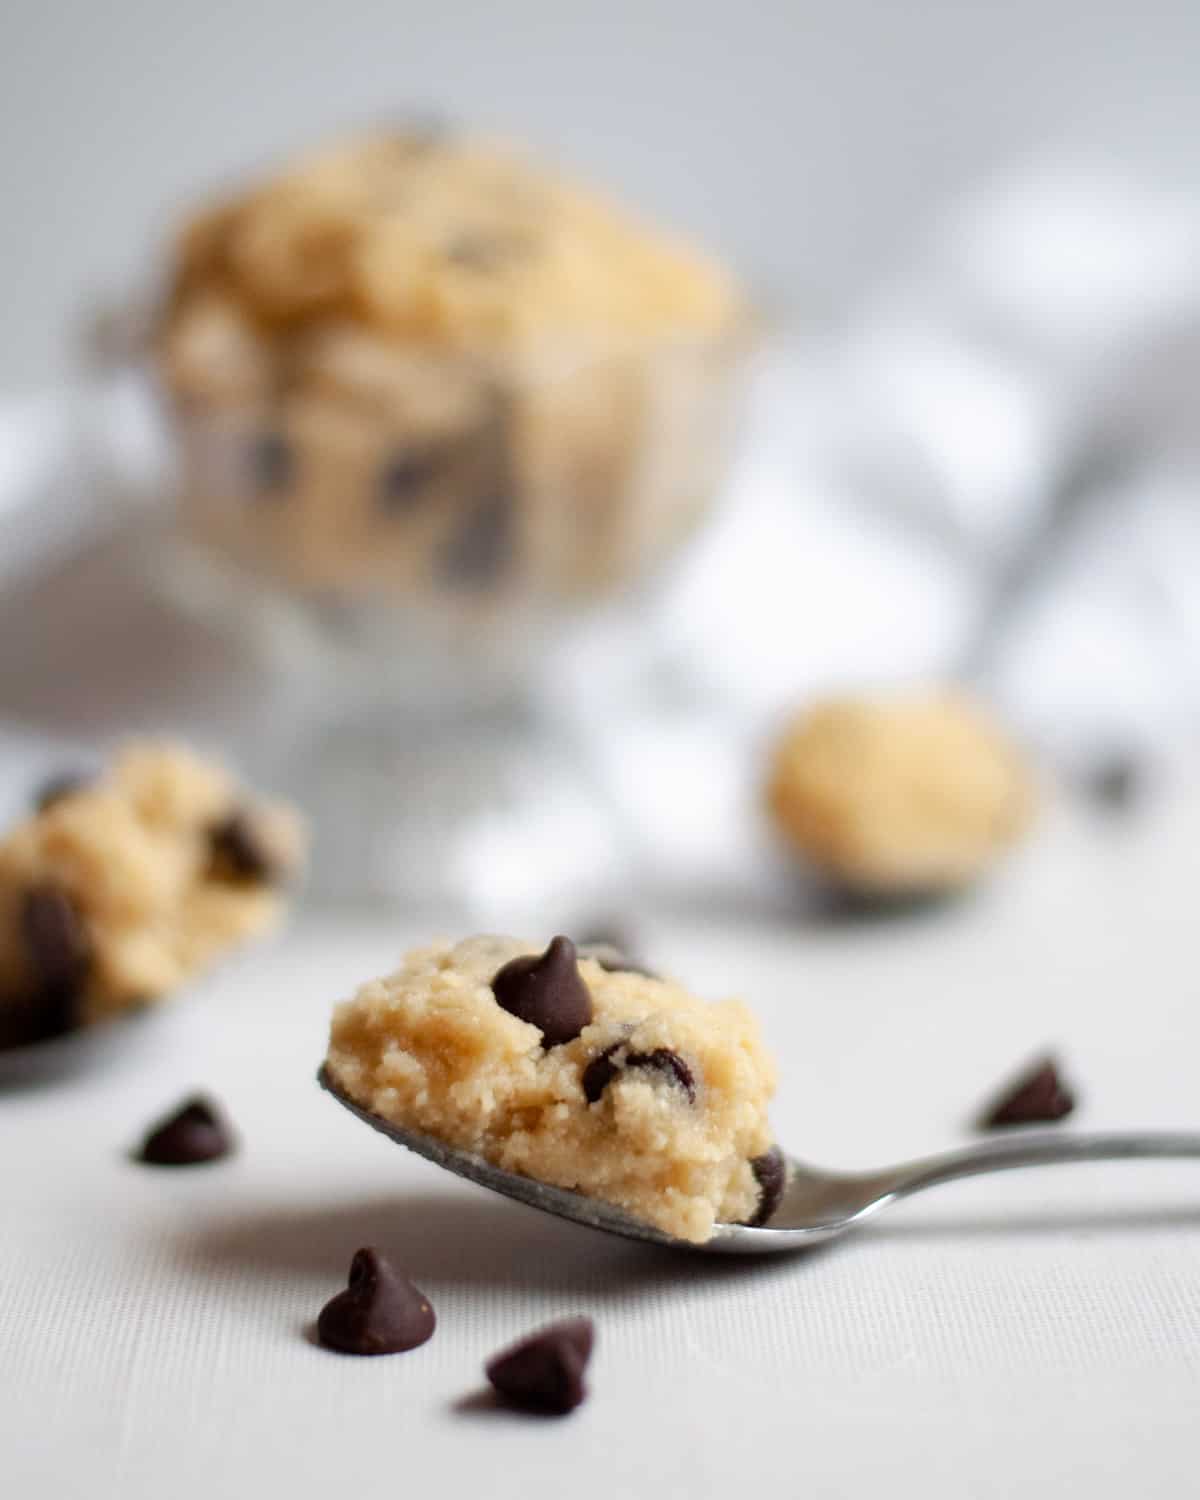 a spoonful of high protein edible cookie dough. the spoon of cookie dough is surrounded by chocolate chips and there are more spoons of cookie dough and a bowl of cookie dough blurred in the background.